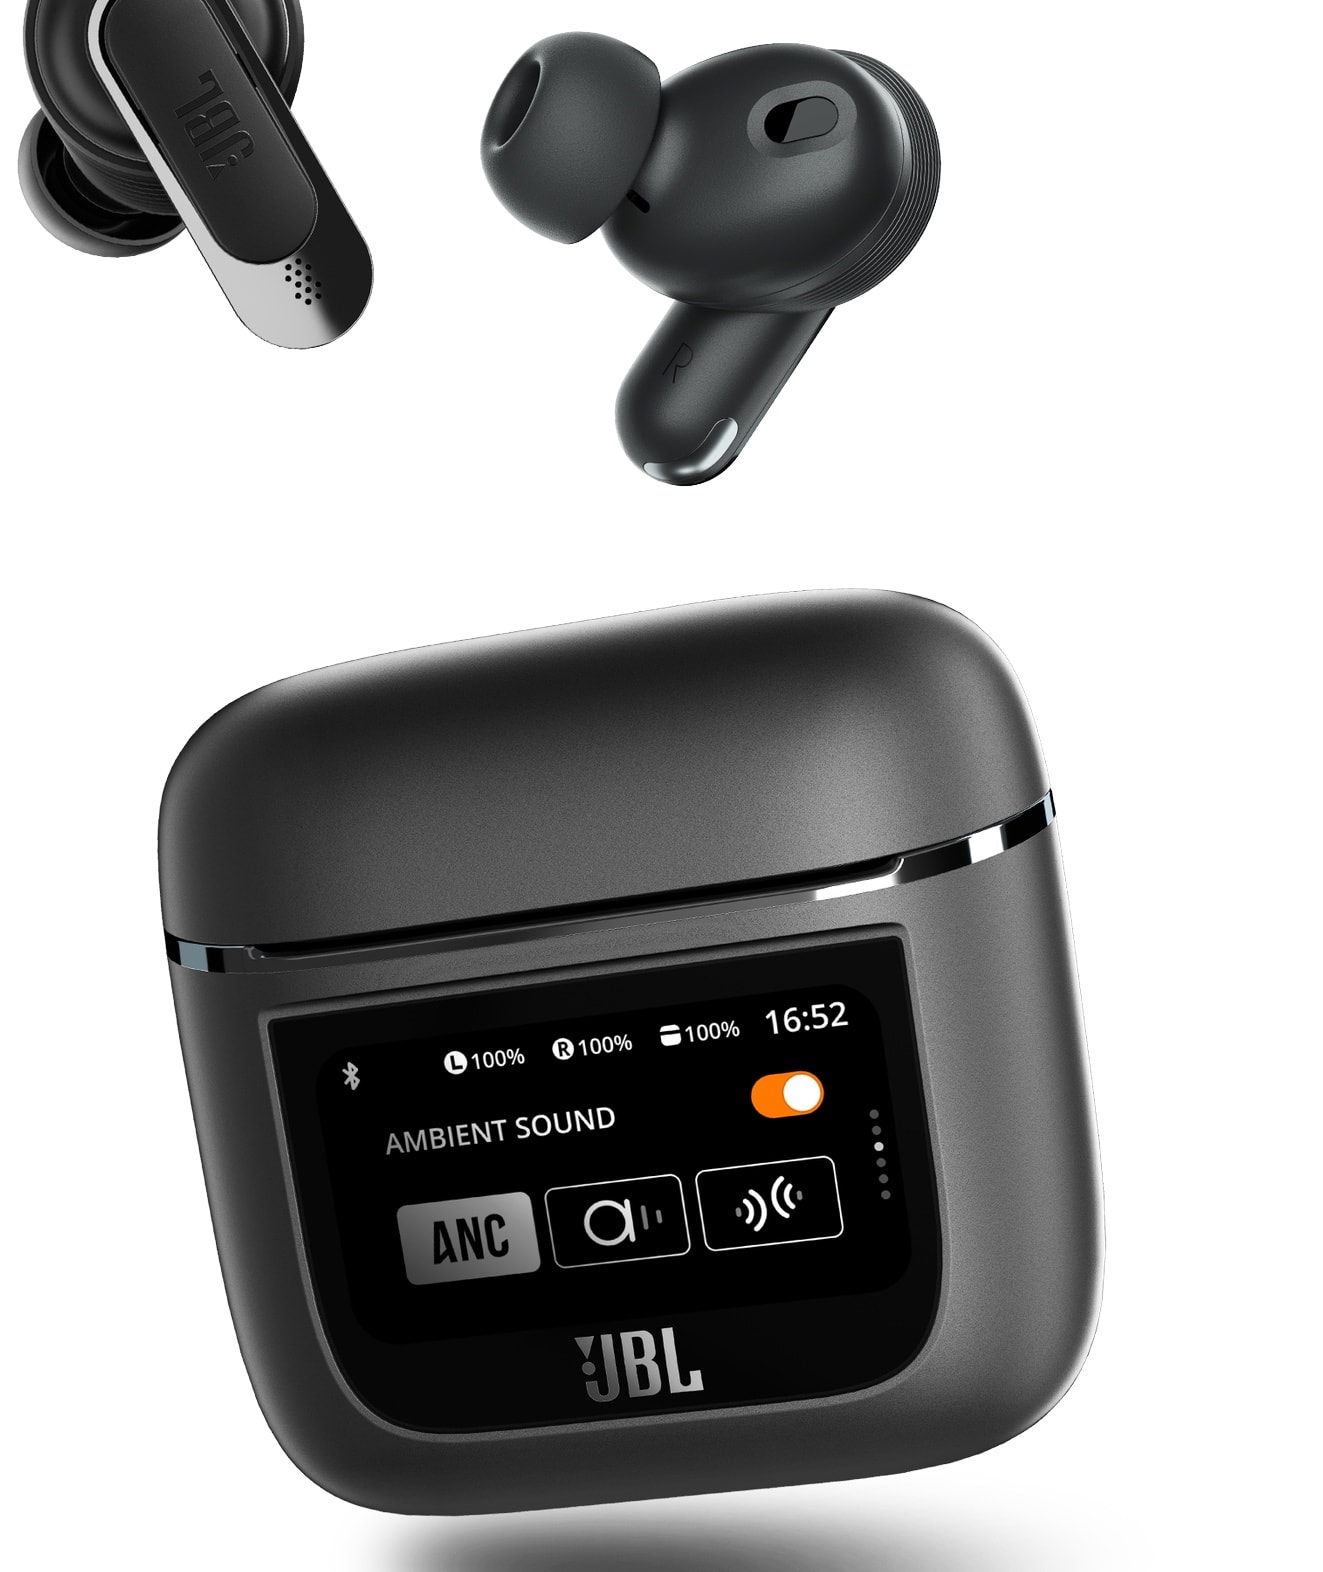 You can control JBL’s new ANC earbuds with their touchscreen case